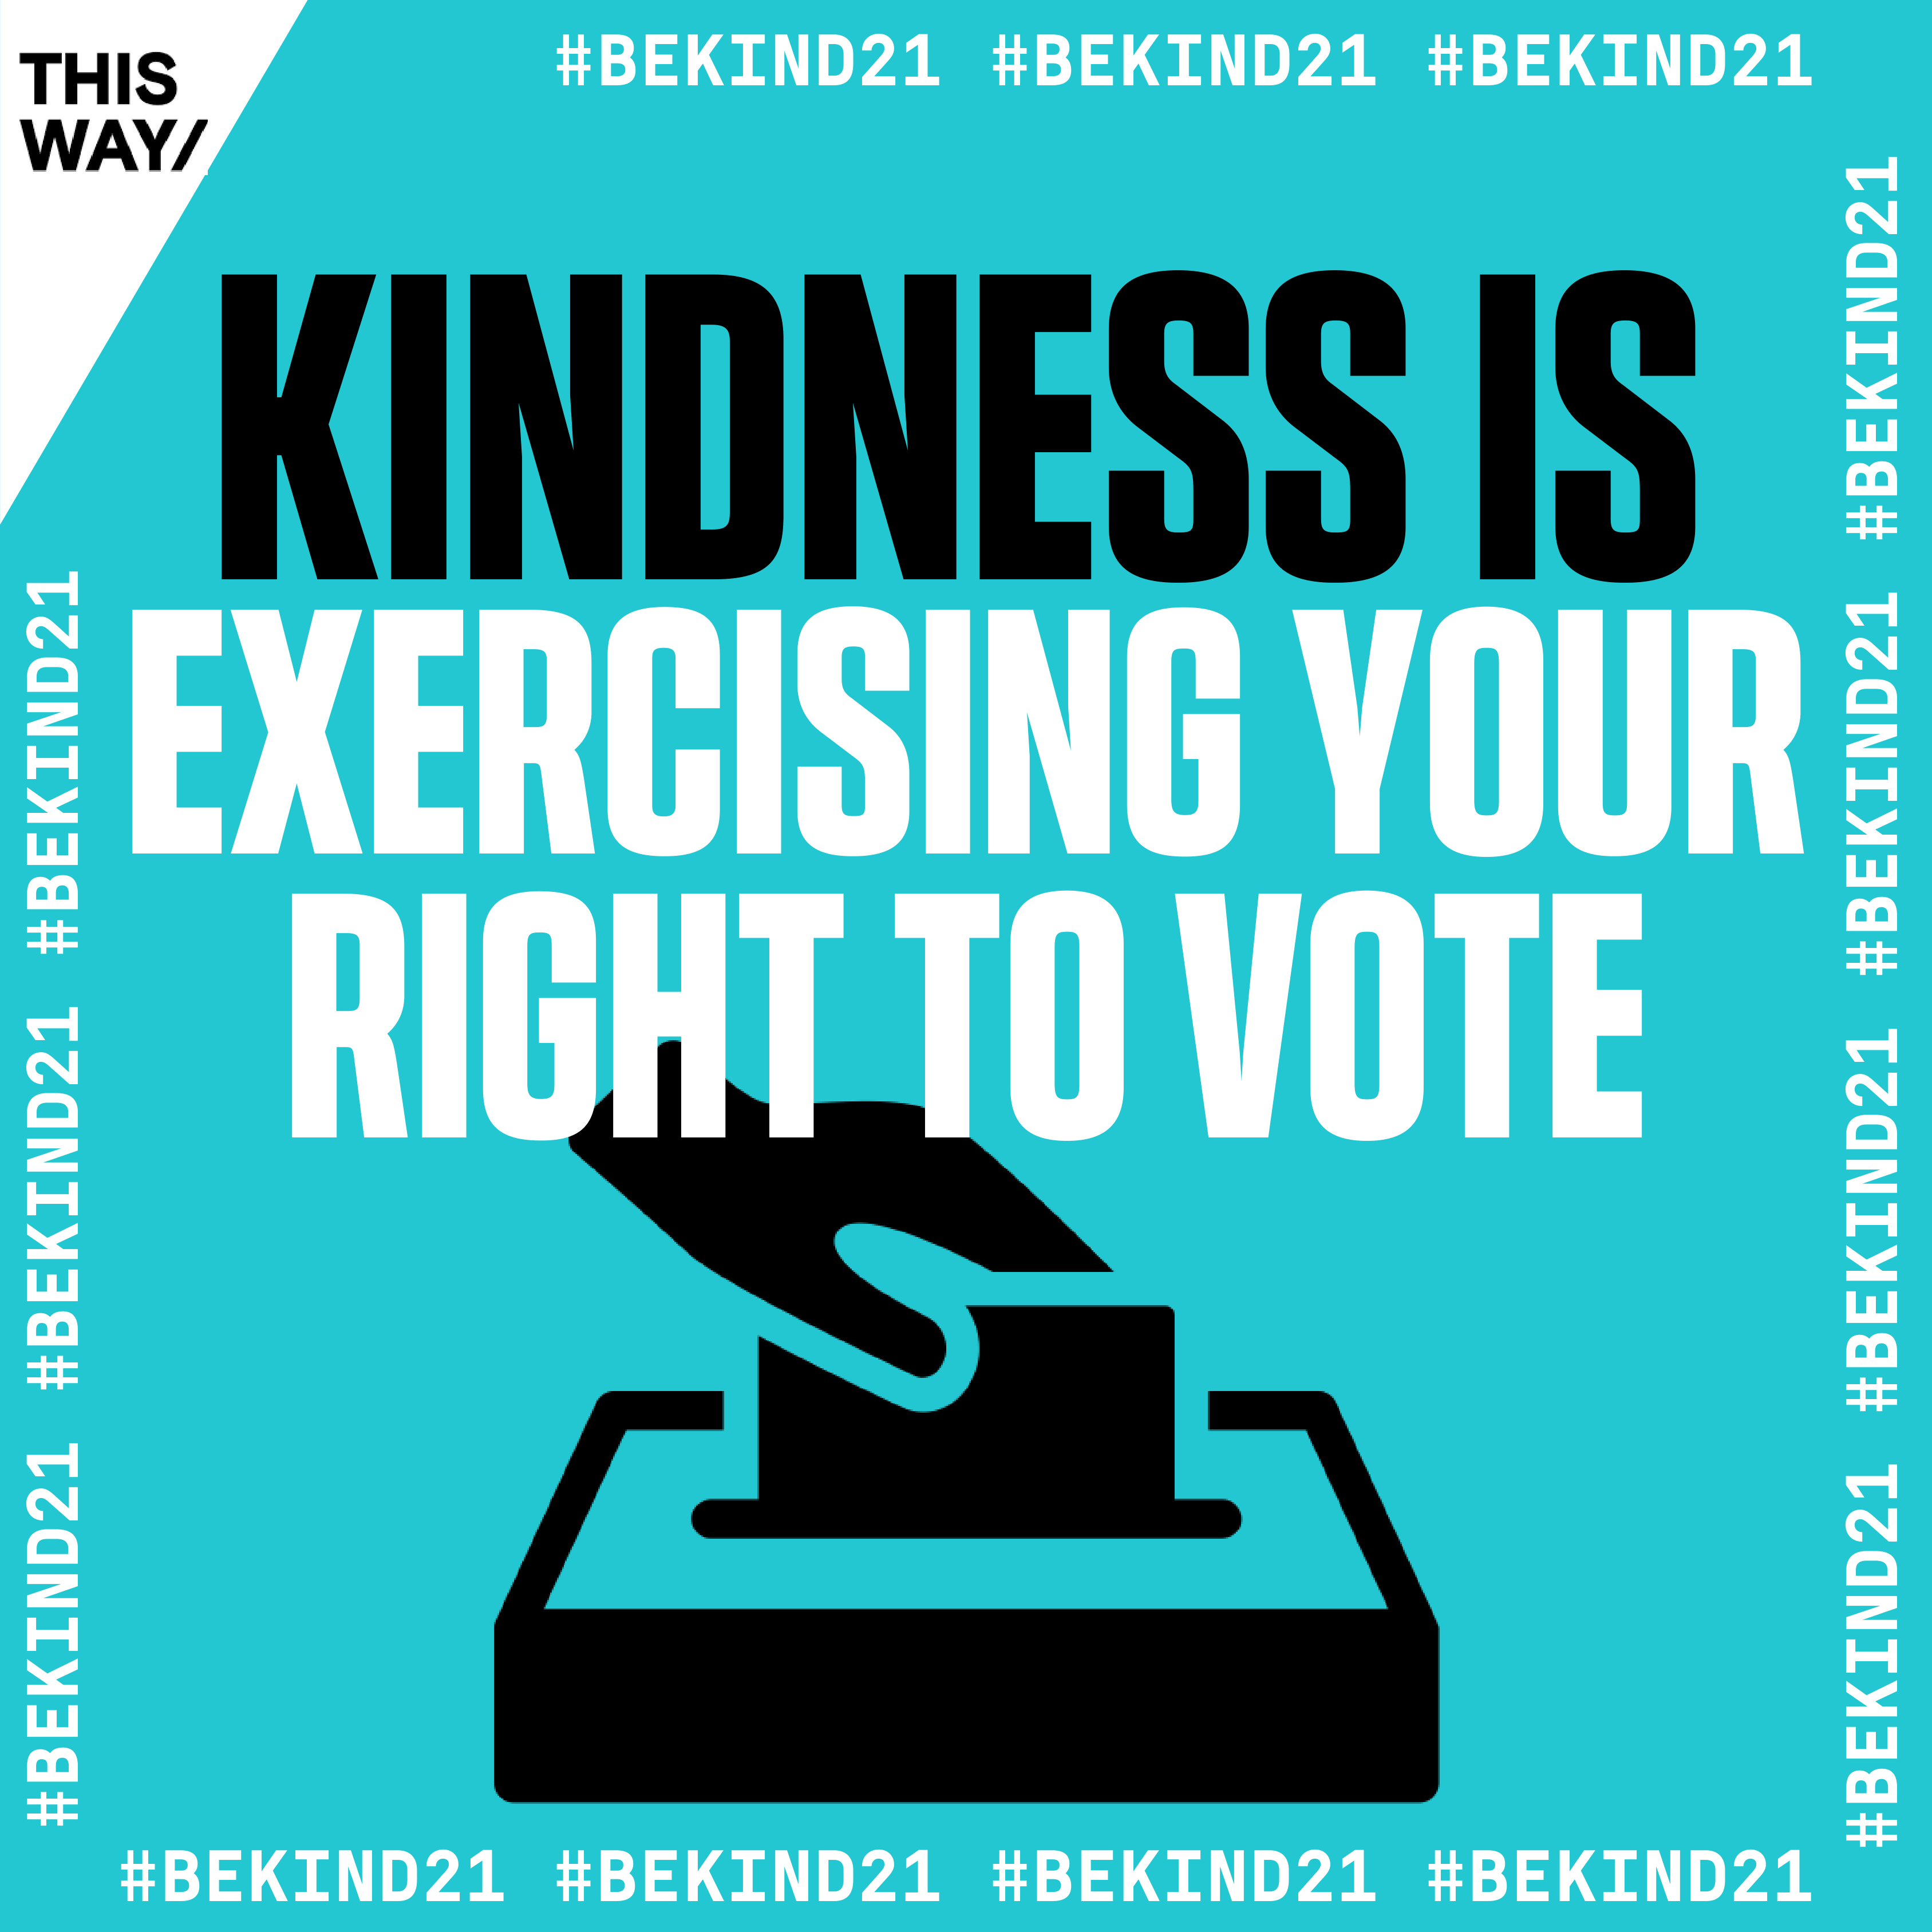 Kindness Is Exercising Your Right to Vote